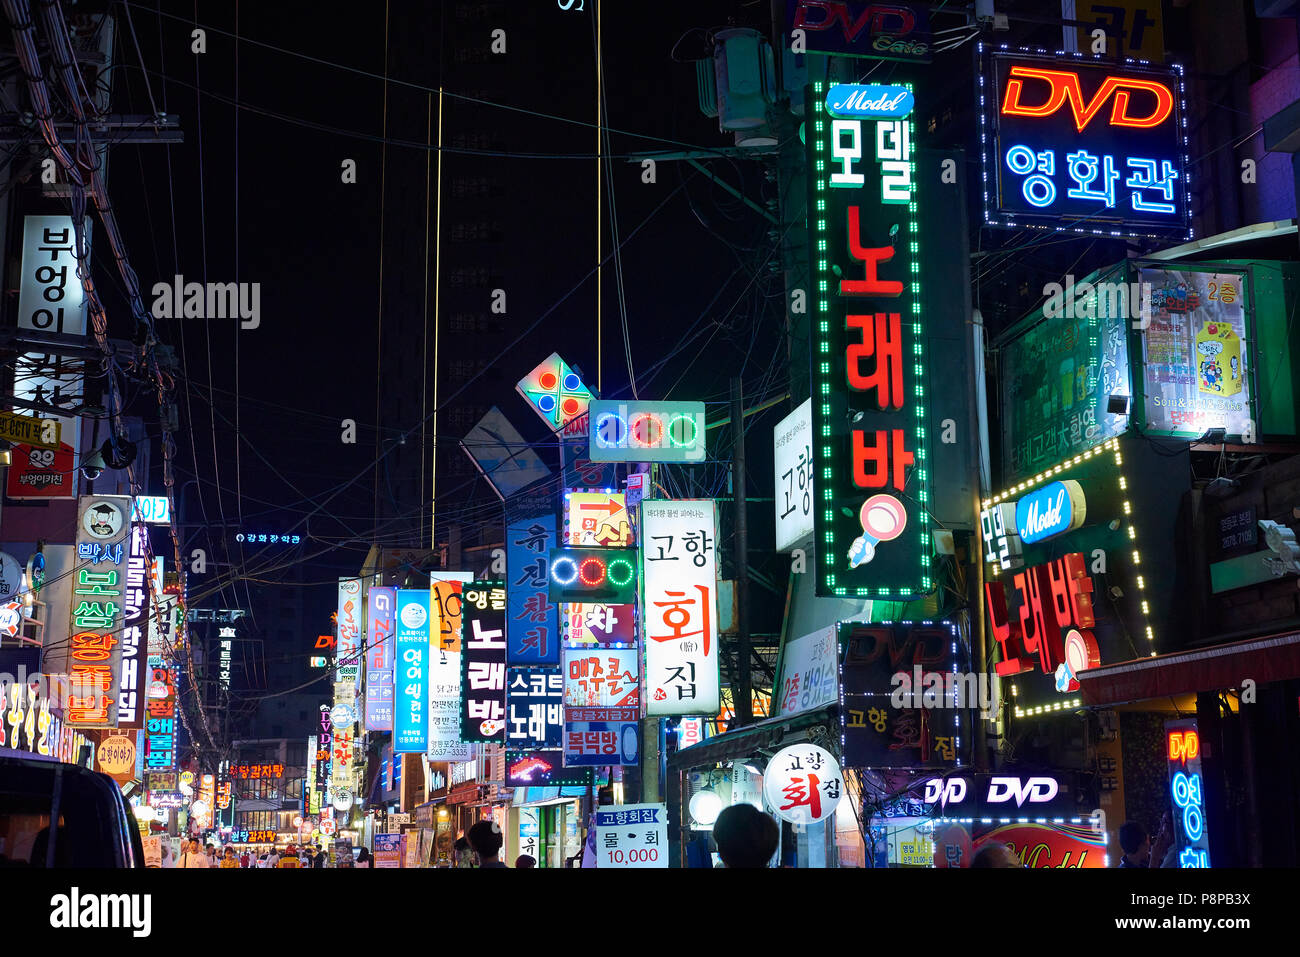 Yeongdeungpodong street at night in Seoul, South Korea, cluttered with shop signs lighting. The area is known for its nightlife. Stock Photo